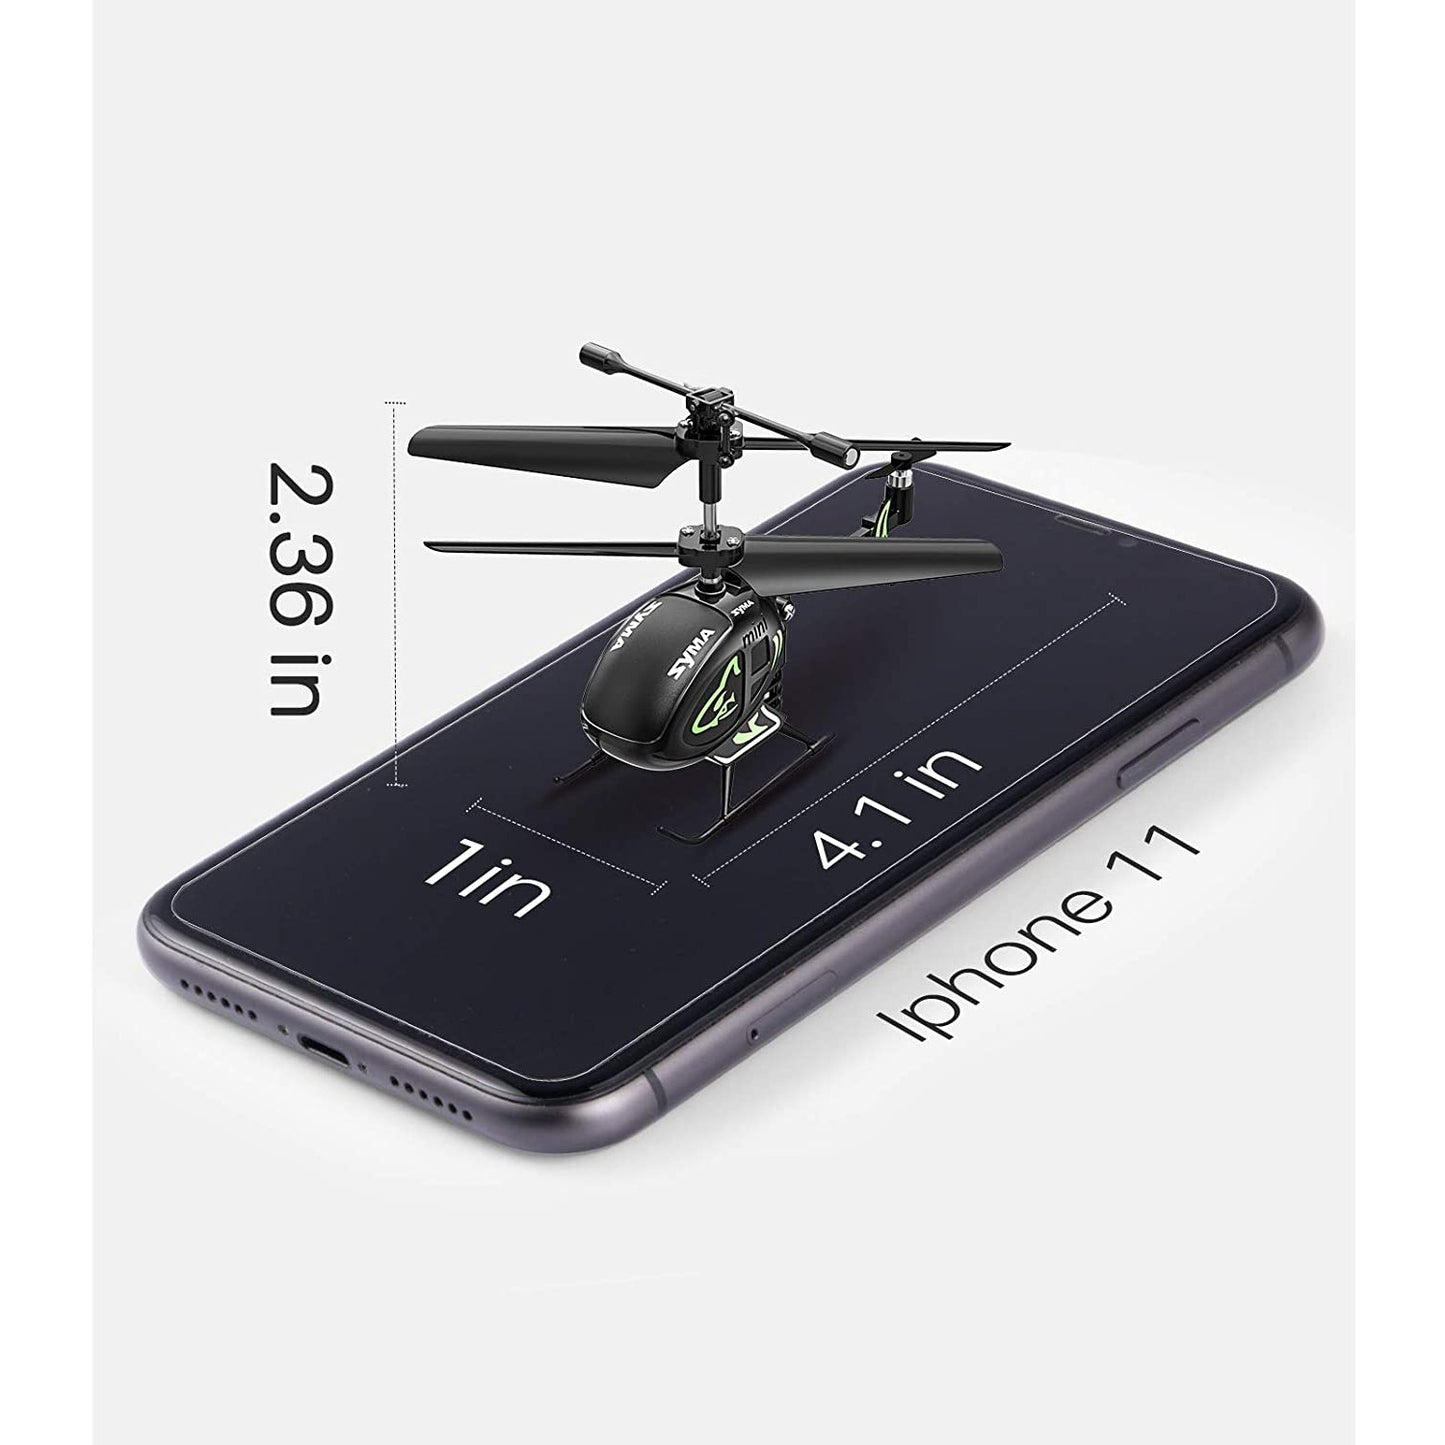 Size dimensions for a mini RC helicopter. Width 4.1 inch x length 1 inch x height 2.36 inch.